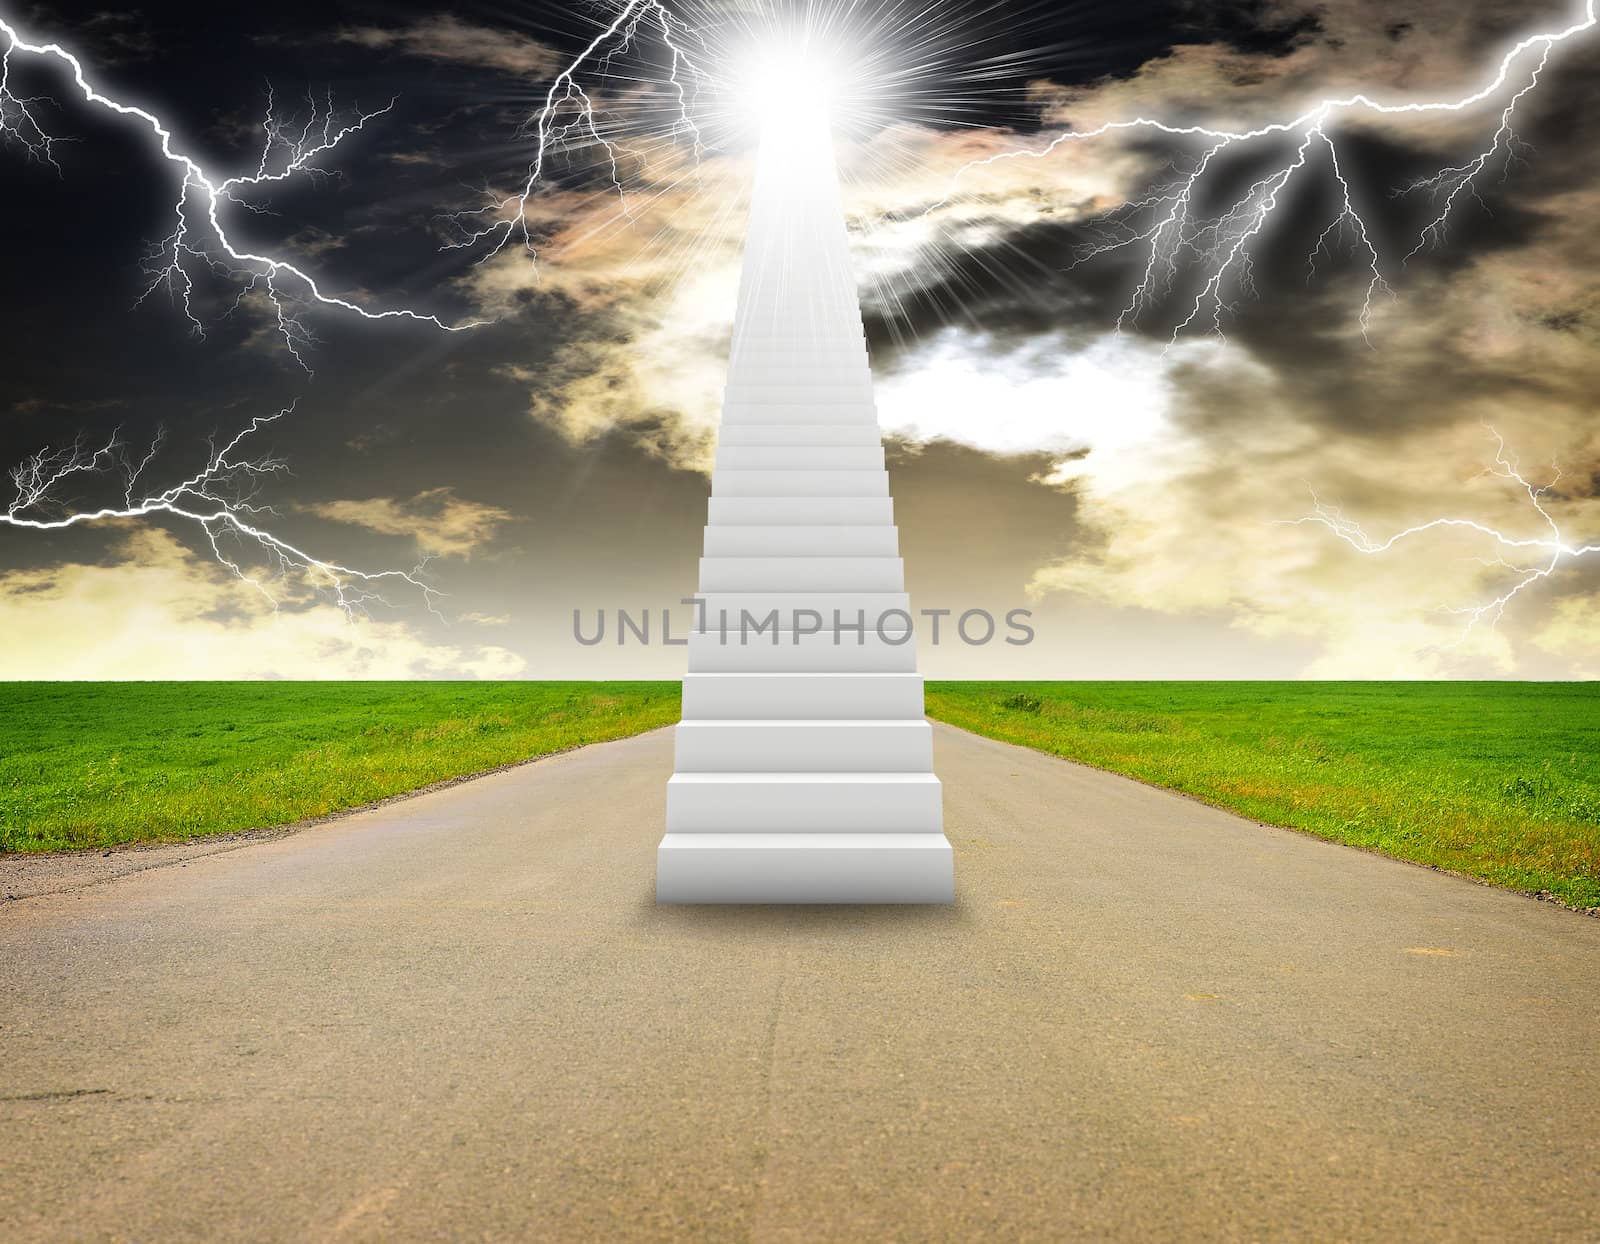 Stairs in sky with green grass, road and thunderstorm. Concept background